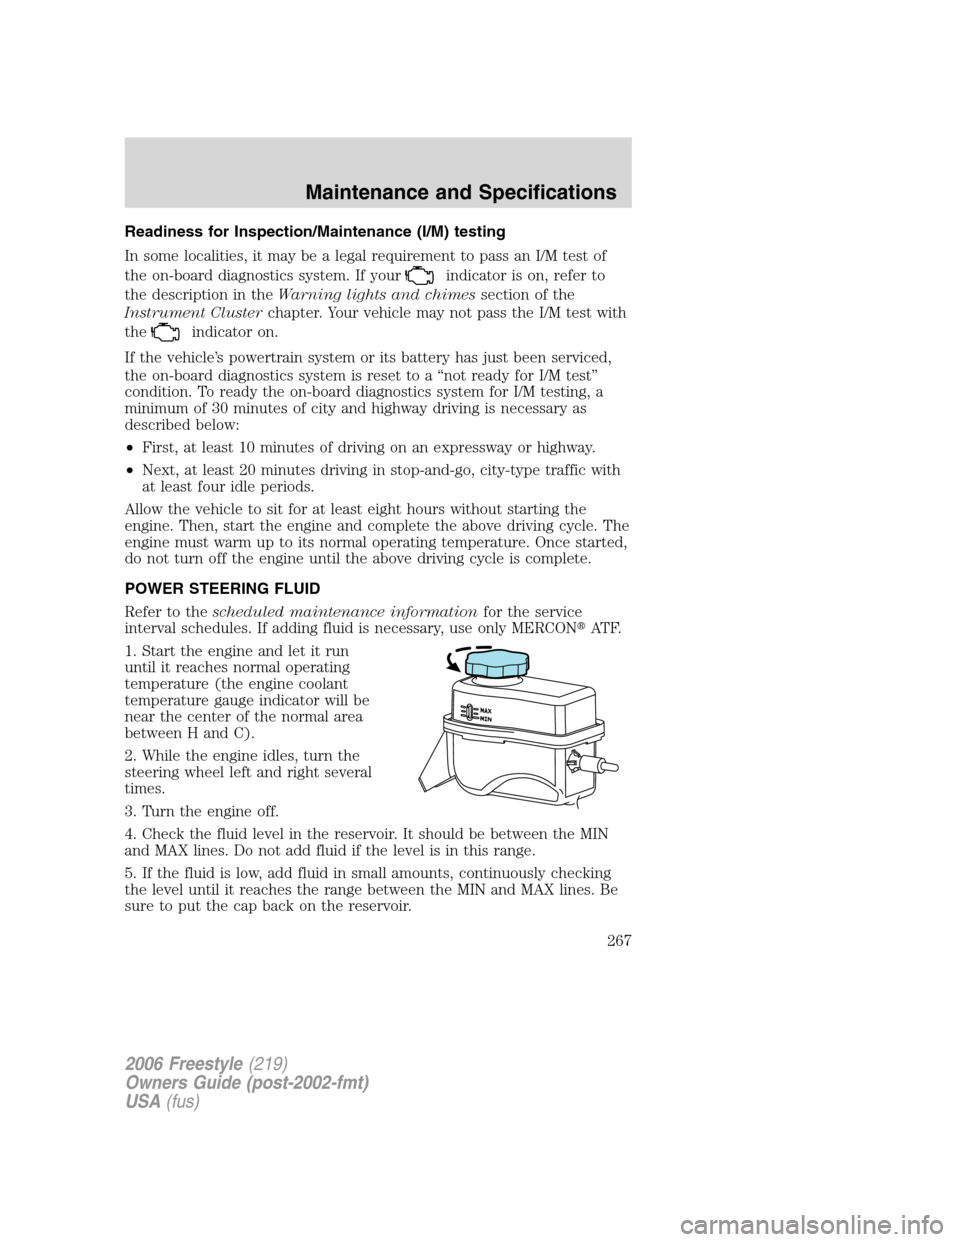 FORD FREESTYLE 2006 1.G User Guide Readiness for Inspection/Maintenance (I/M) testing
In some localities, it may be a legal requirement to pass an I/M test of
the on-board diagnostics system. If your
indicator is on, refer to
the descr